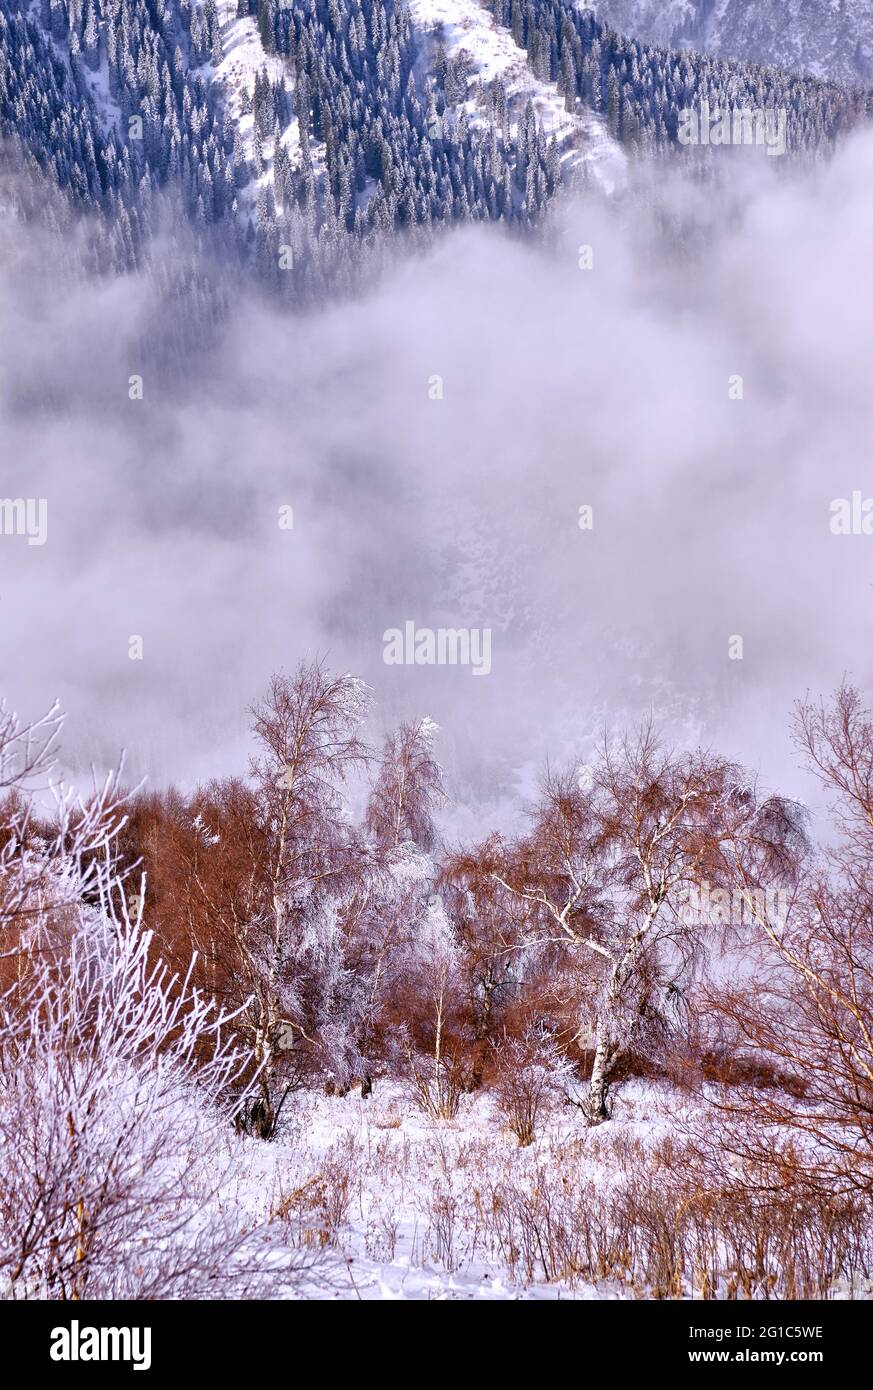 Morning white hoarfrost and snow on the branches of a trees in the mountains on the background of snowy fir trees; winter fairytale concept Stock Photo